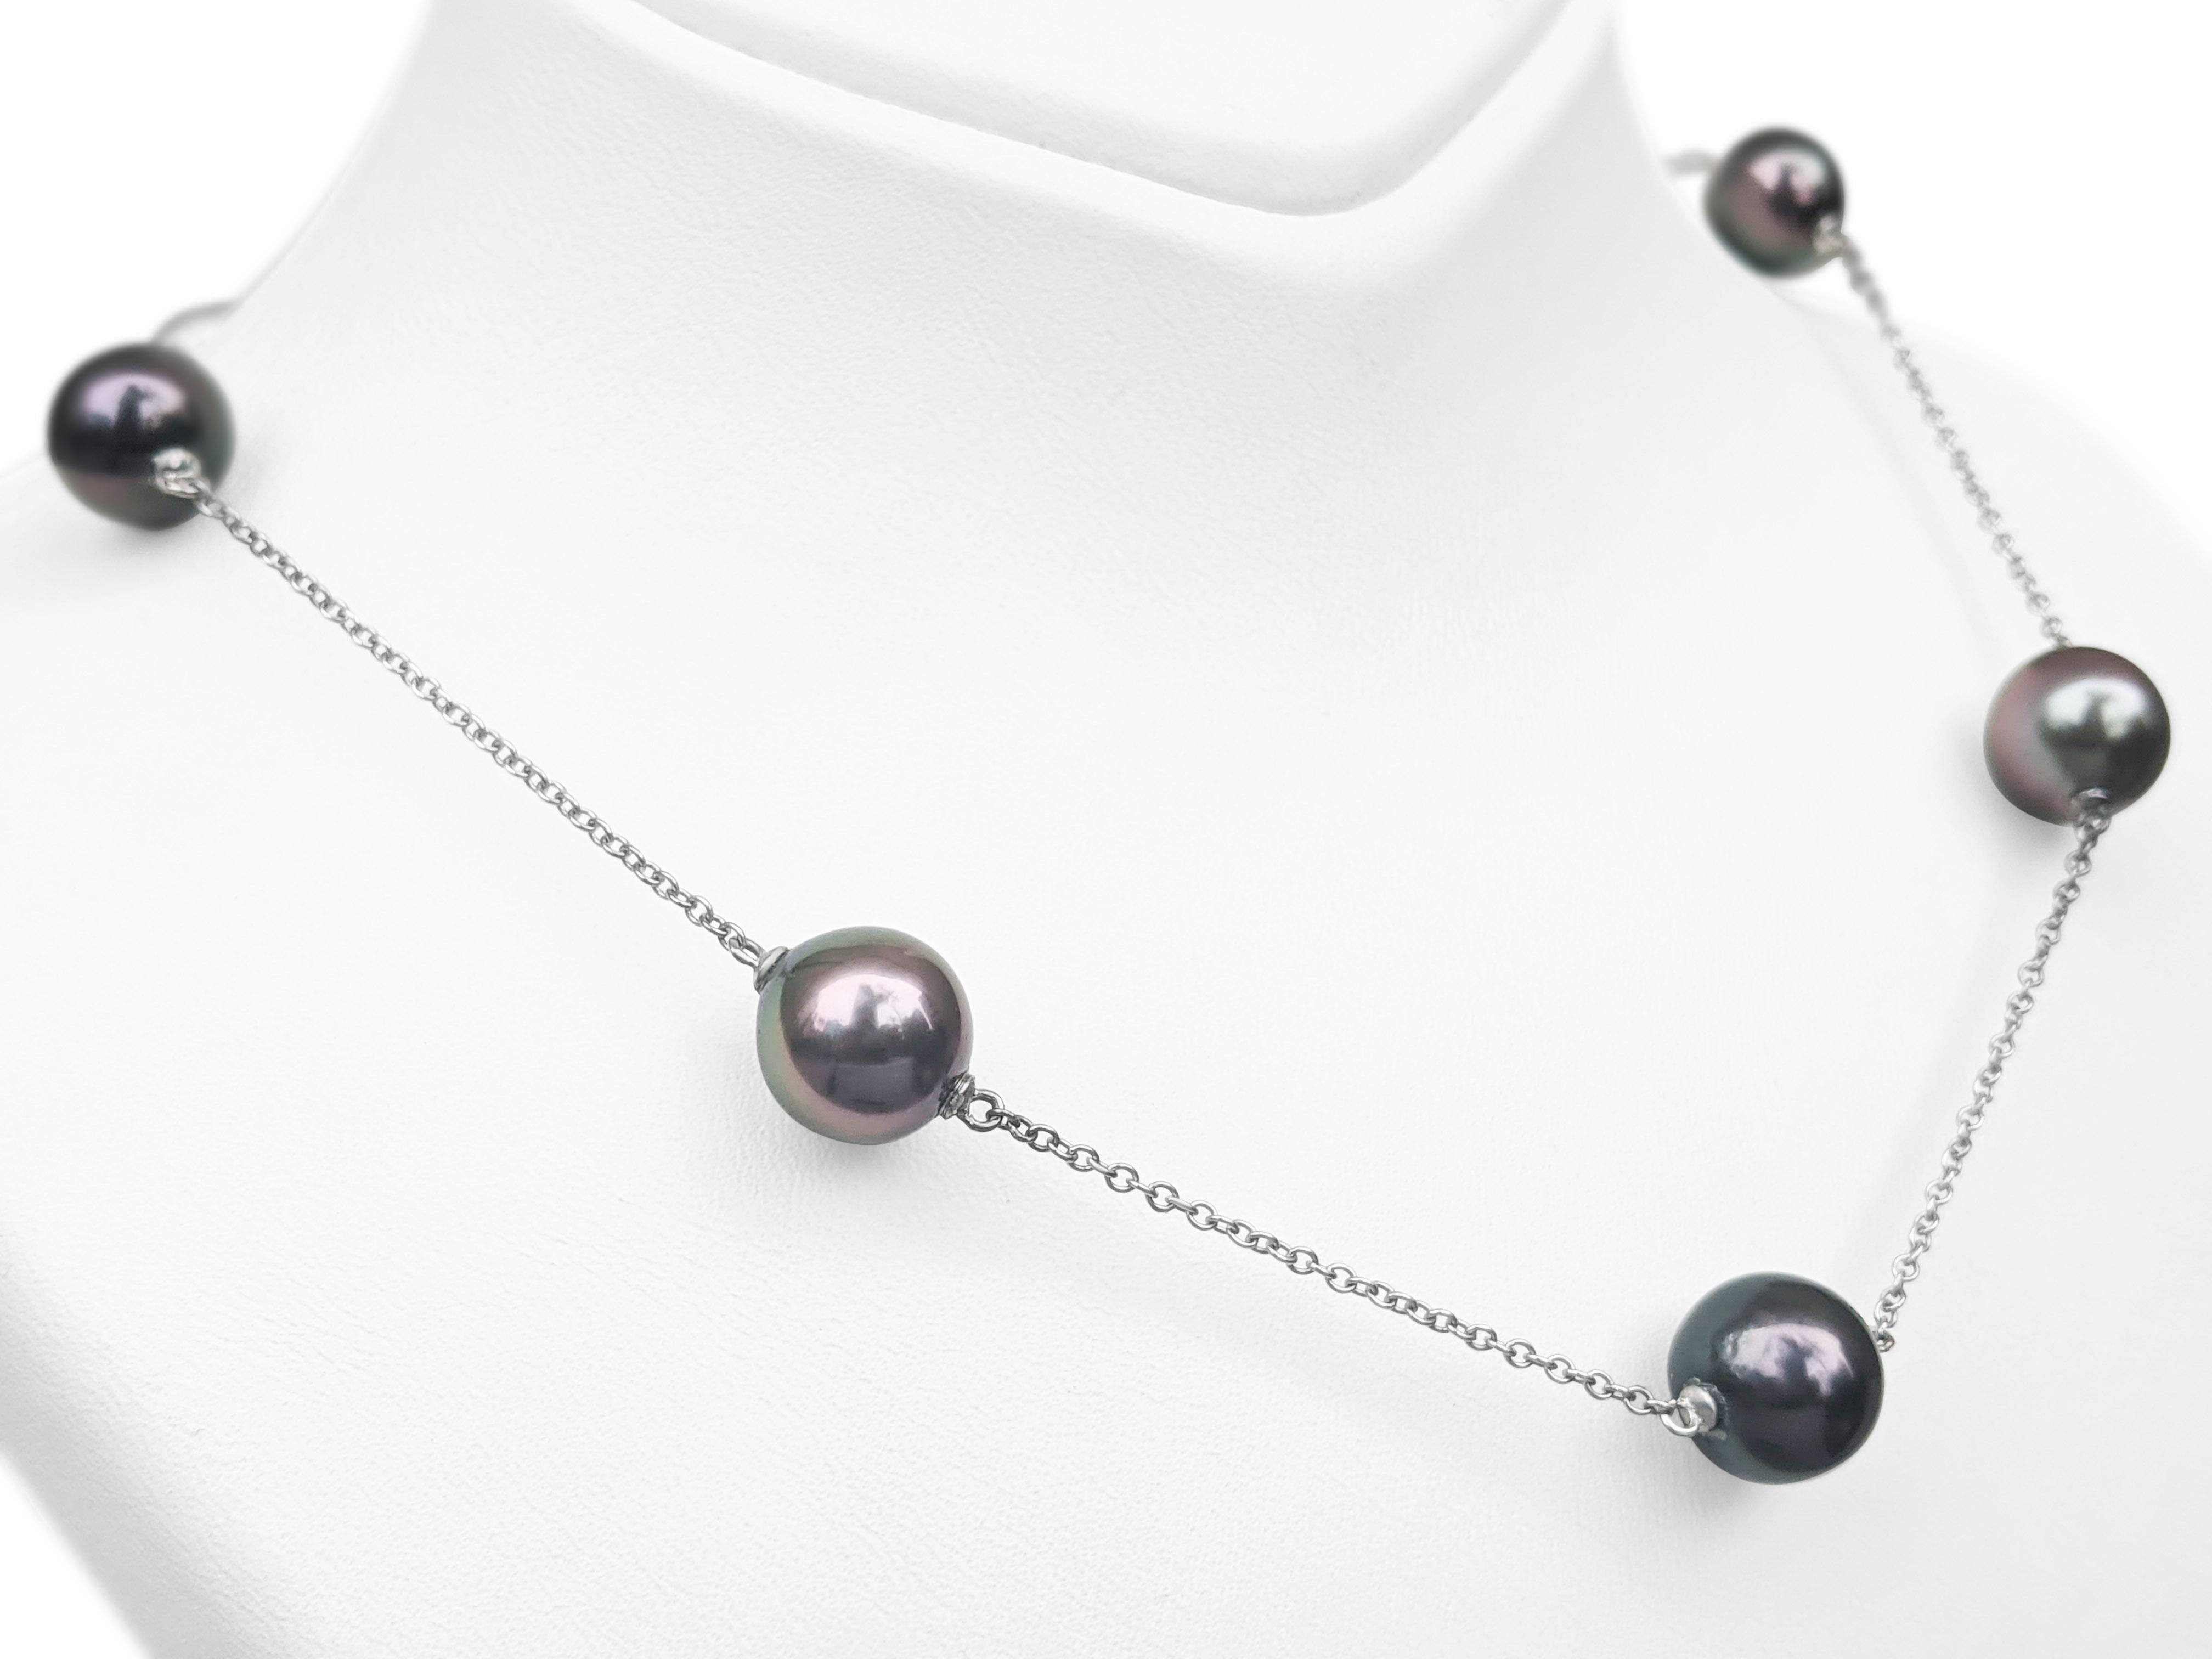 Center Tahitian Cultured Pearls:
Size: 7 black beads - approx.  9-12 mm
Color: Black Beads
Saltwater pearls

Item ships from Israeli Diamonds Exchange, customers are responsible for any local customs or VAT fees that might apply to the purchase.